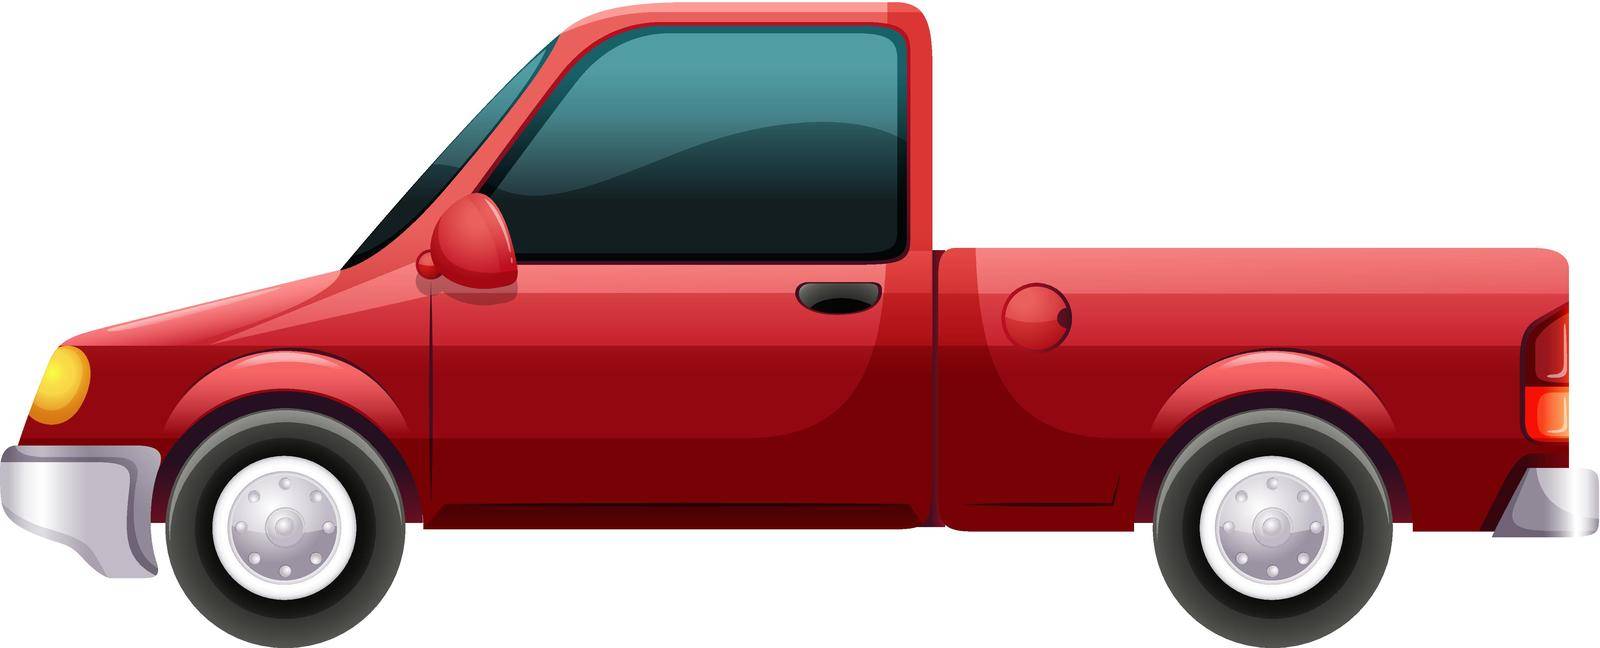 Illustration of a red vehicle on a white background